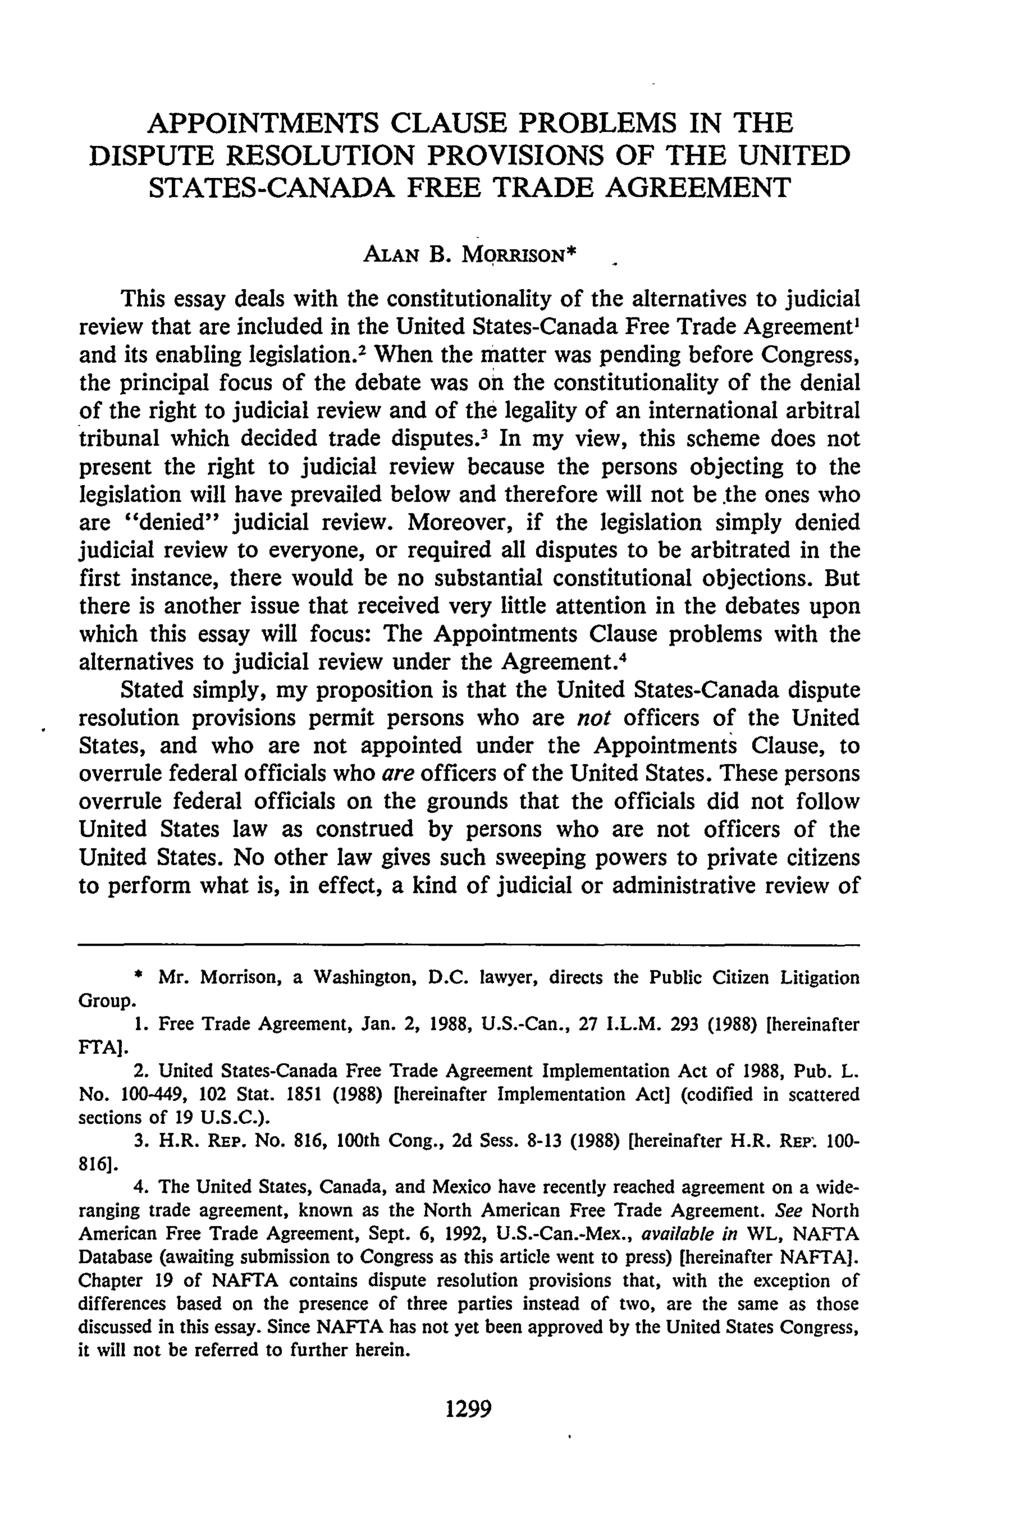 APPOINTMENTS CLAUSE PROBLEMS IN THE DISPUTE RESOLUTION PROVISIONS OF THE UNITED STATES-CANADA FREE TRADE AGREEMENT ALAN B.